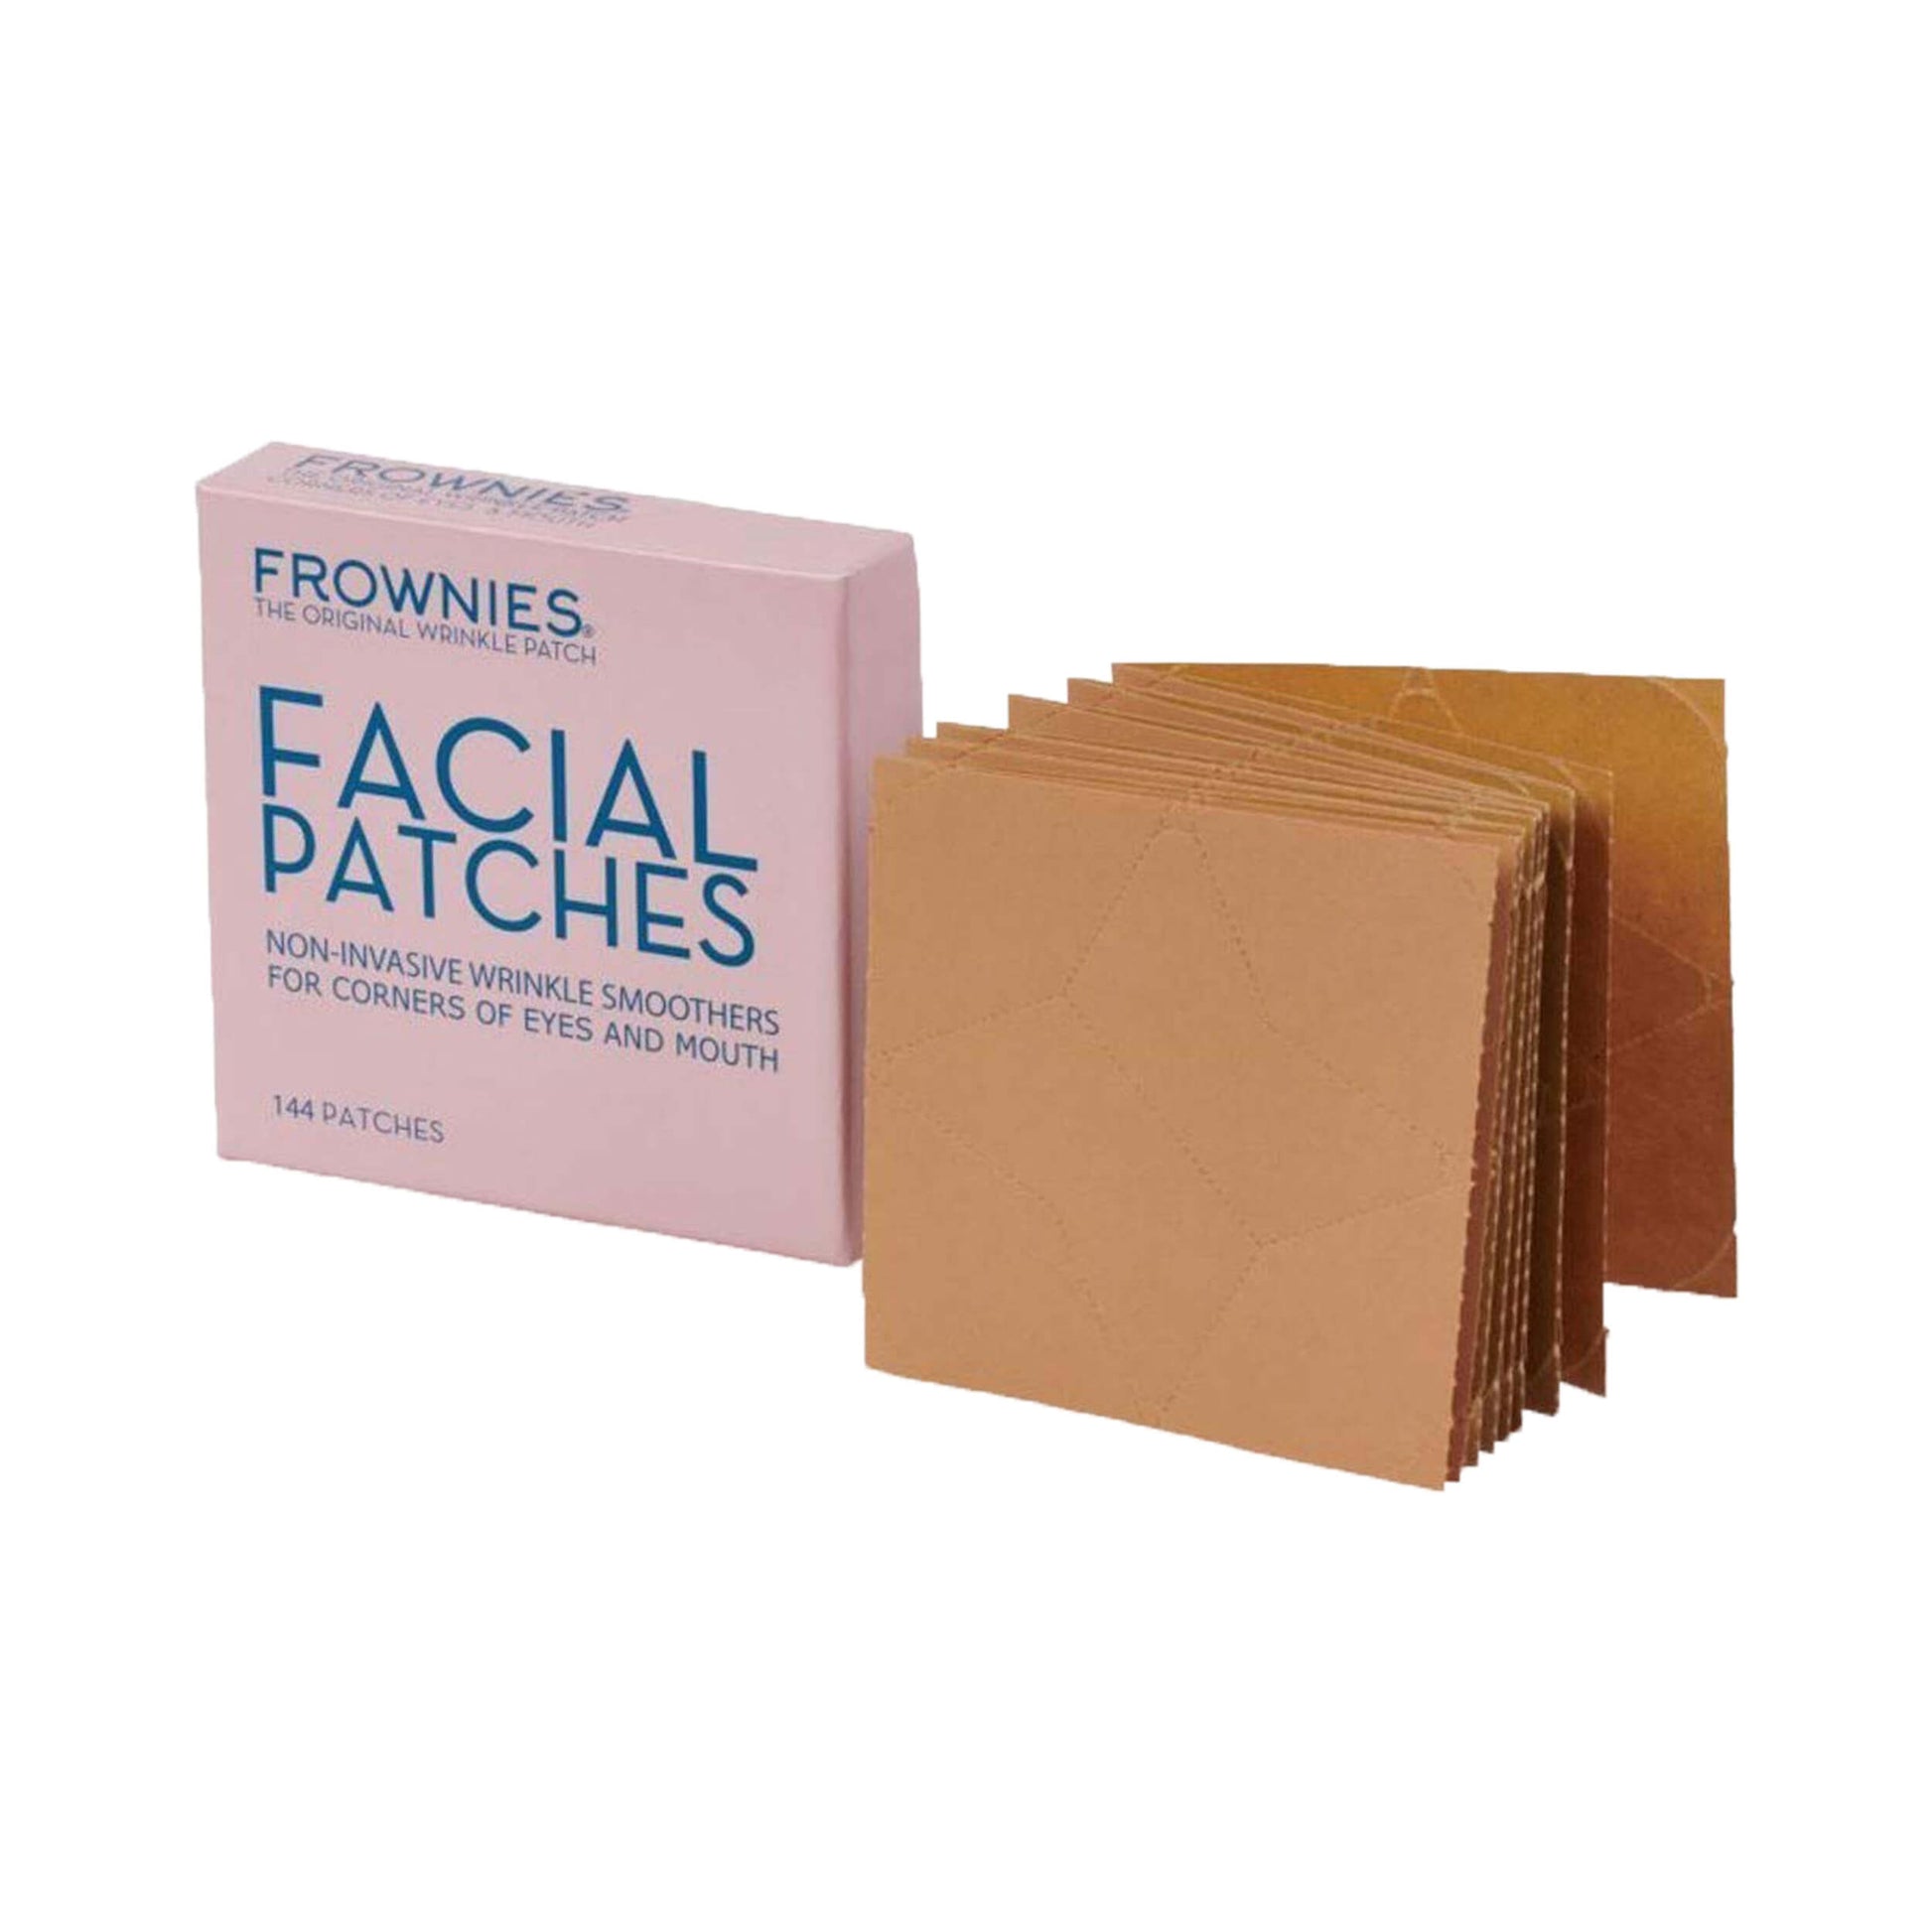 Frownies Facial Patches for Wrinkles on the Corner of Eyes Mouth (CEM) Open